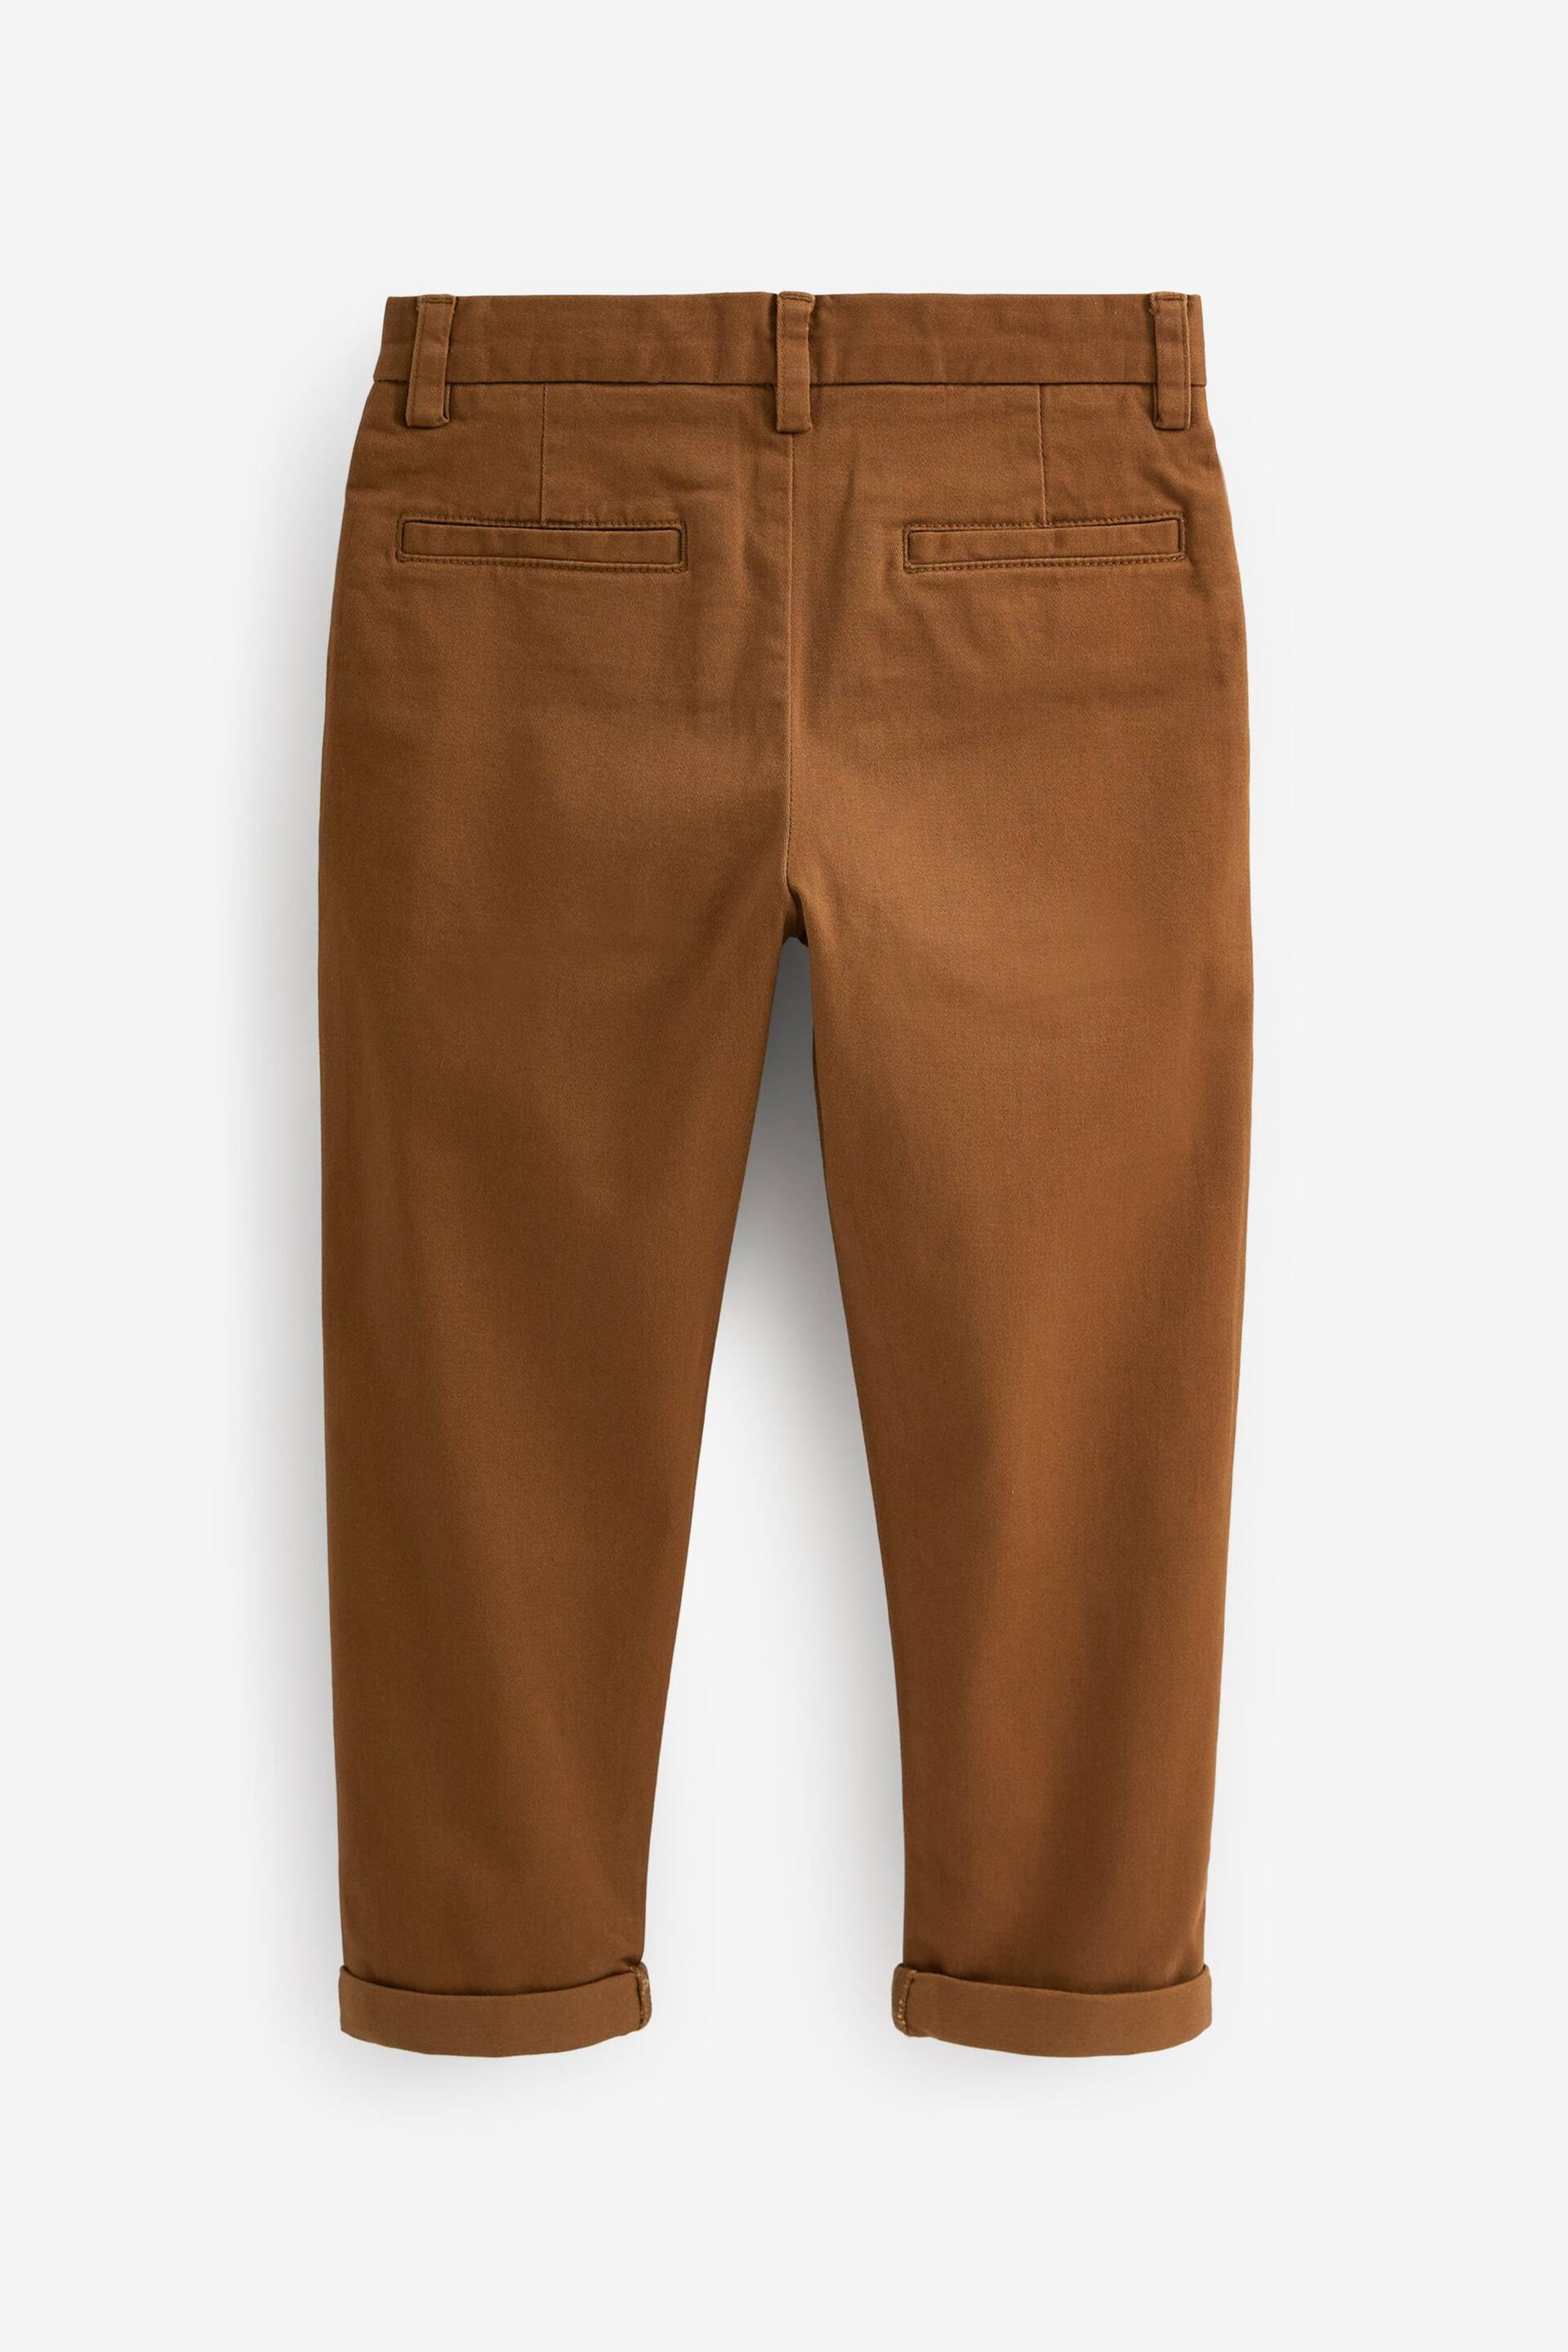 Ginger/Tan Brown Tapered Loose Fit Stretch Chino Trousers (3-17yrs) - Image 2 of 2